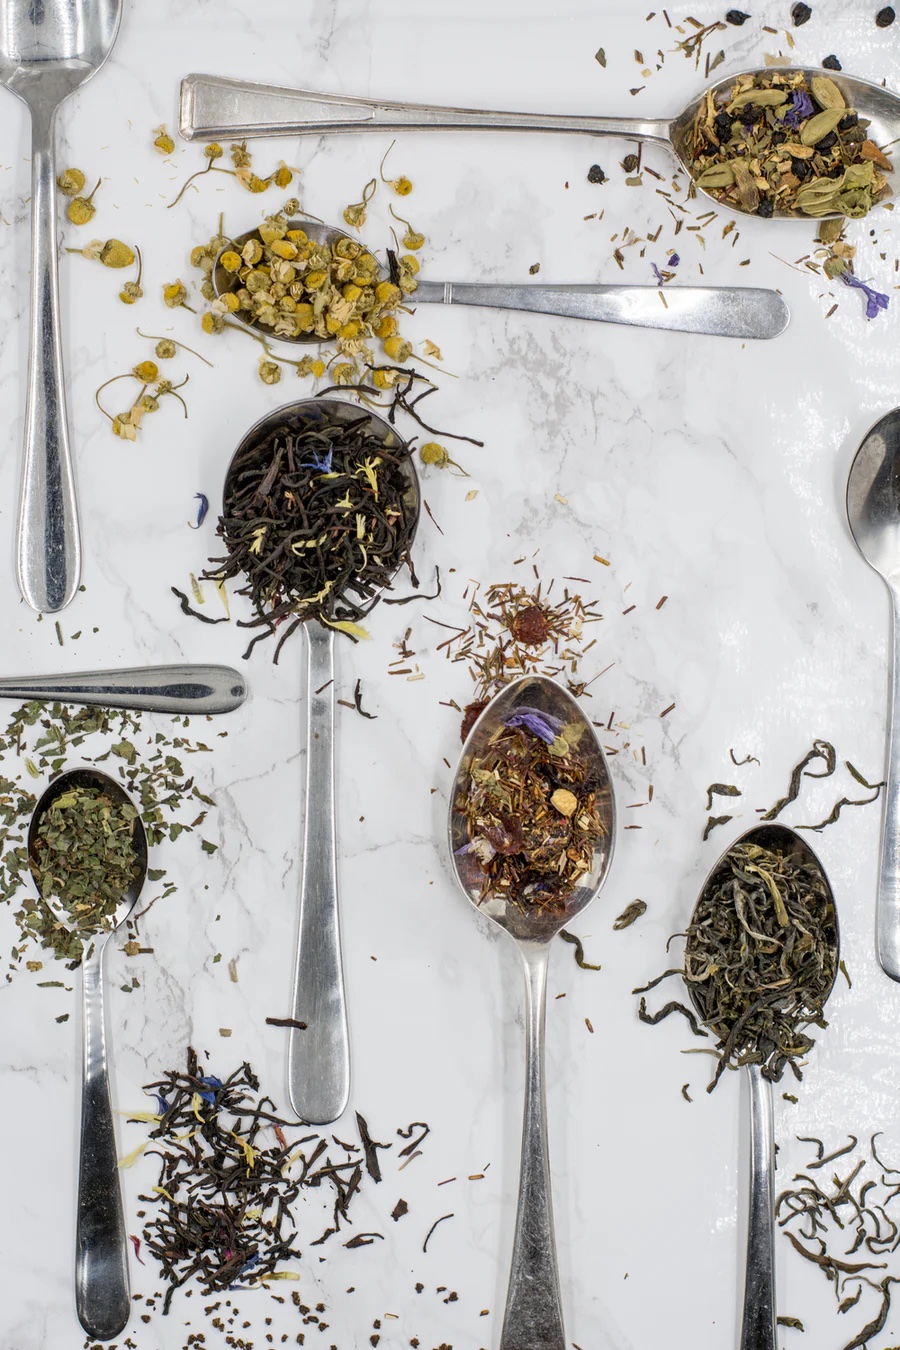 Looking to Boost Your Health? Enjoy the Many Benefits of Drinking Tea